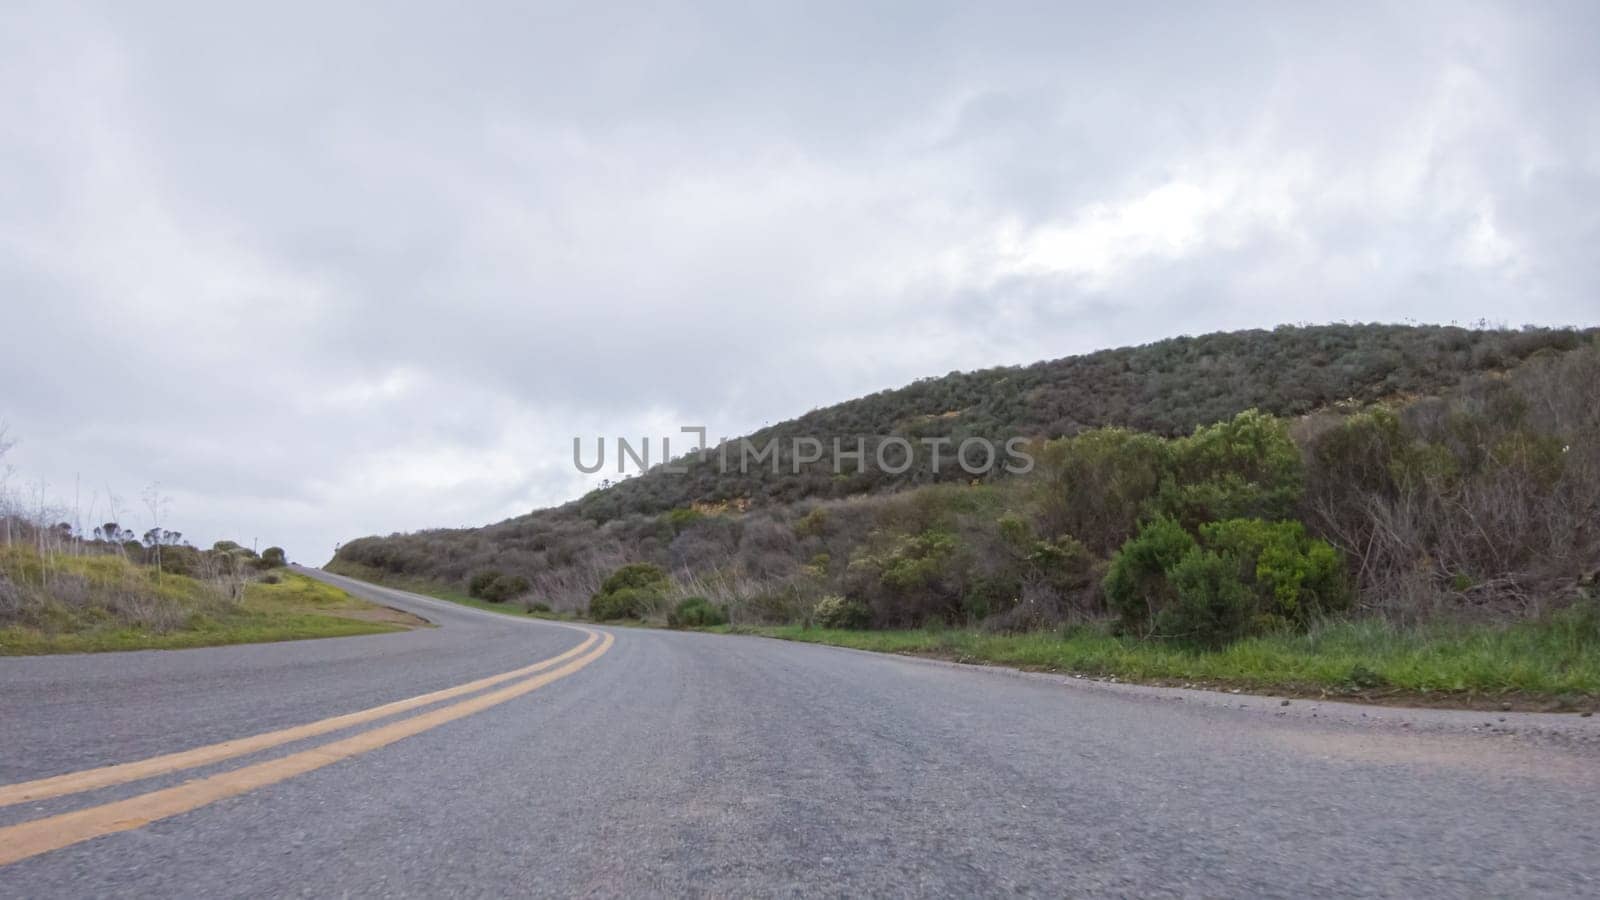 In this serene winter scene, a vehicle carefully makes its way along Los Osos Valley Road and Pecho Valley Road within Montana de Oro State Park.